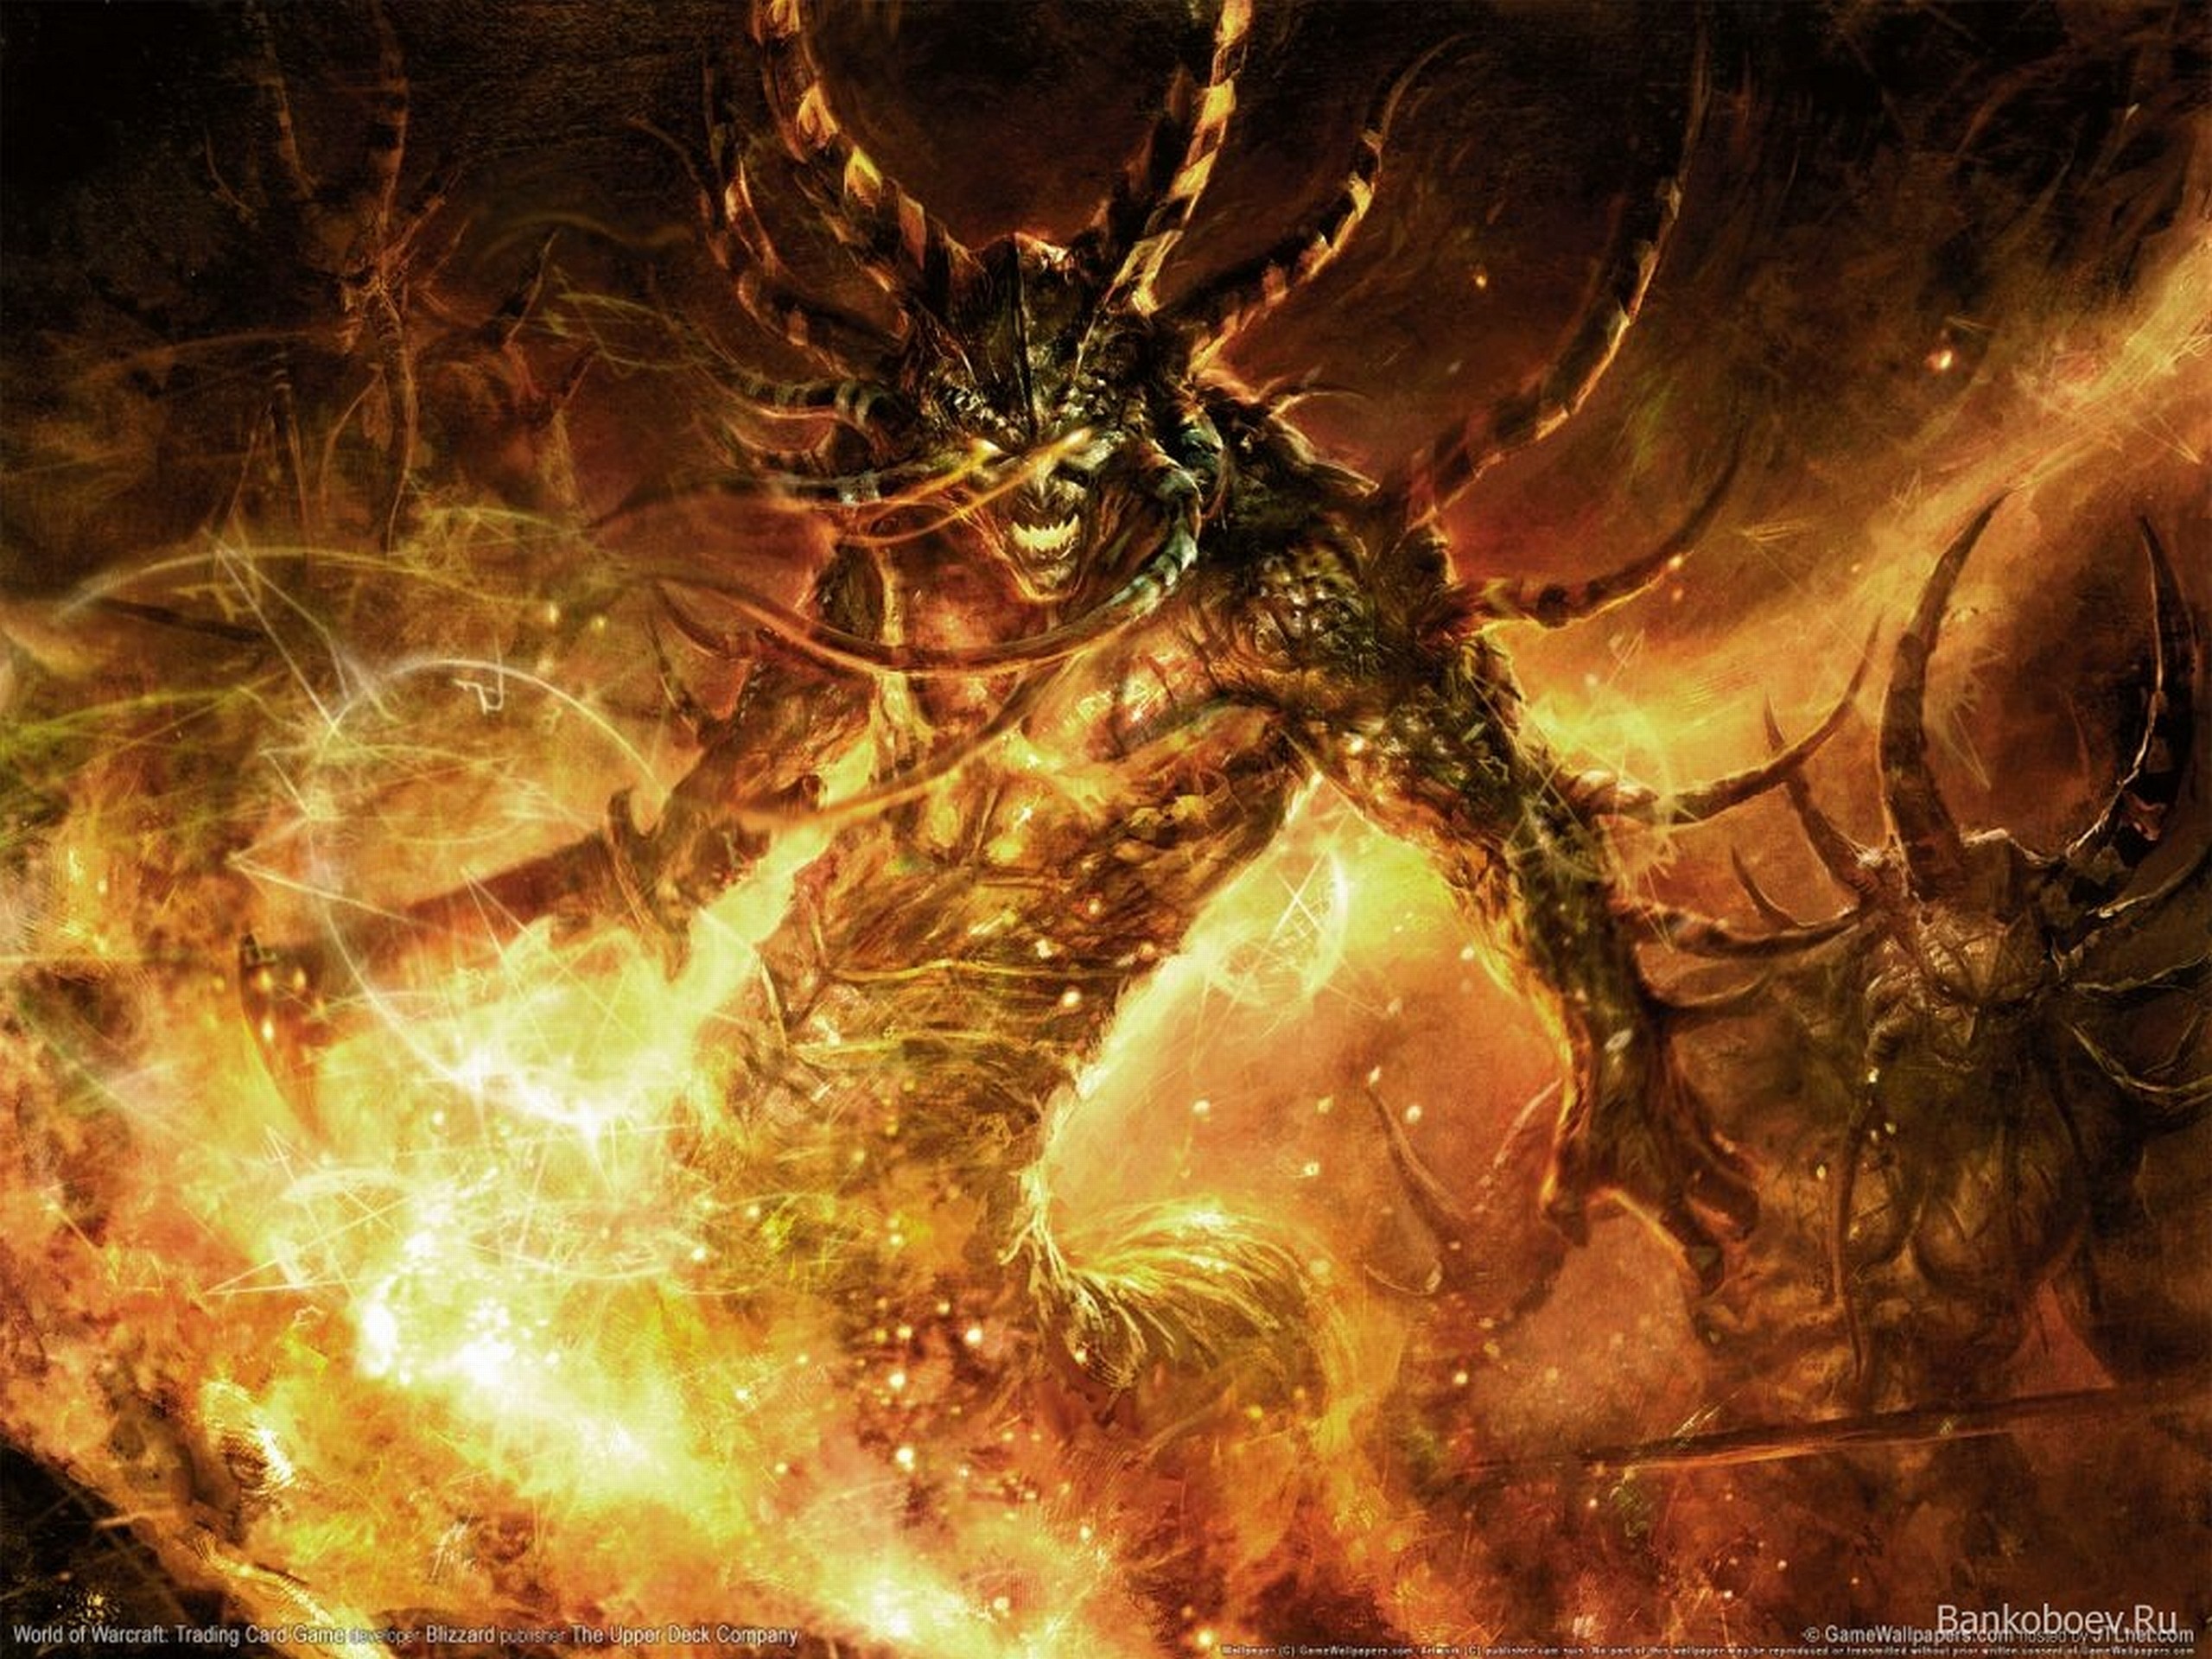 General 2560x1920 World of Warcraft World of Warcraft: Trading Card Game creature demon fantasy art Blizzard Entertainment Trading Card Games